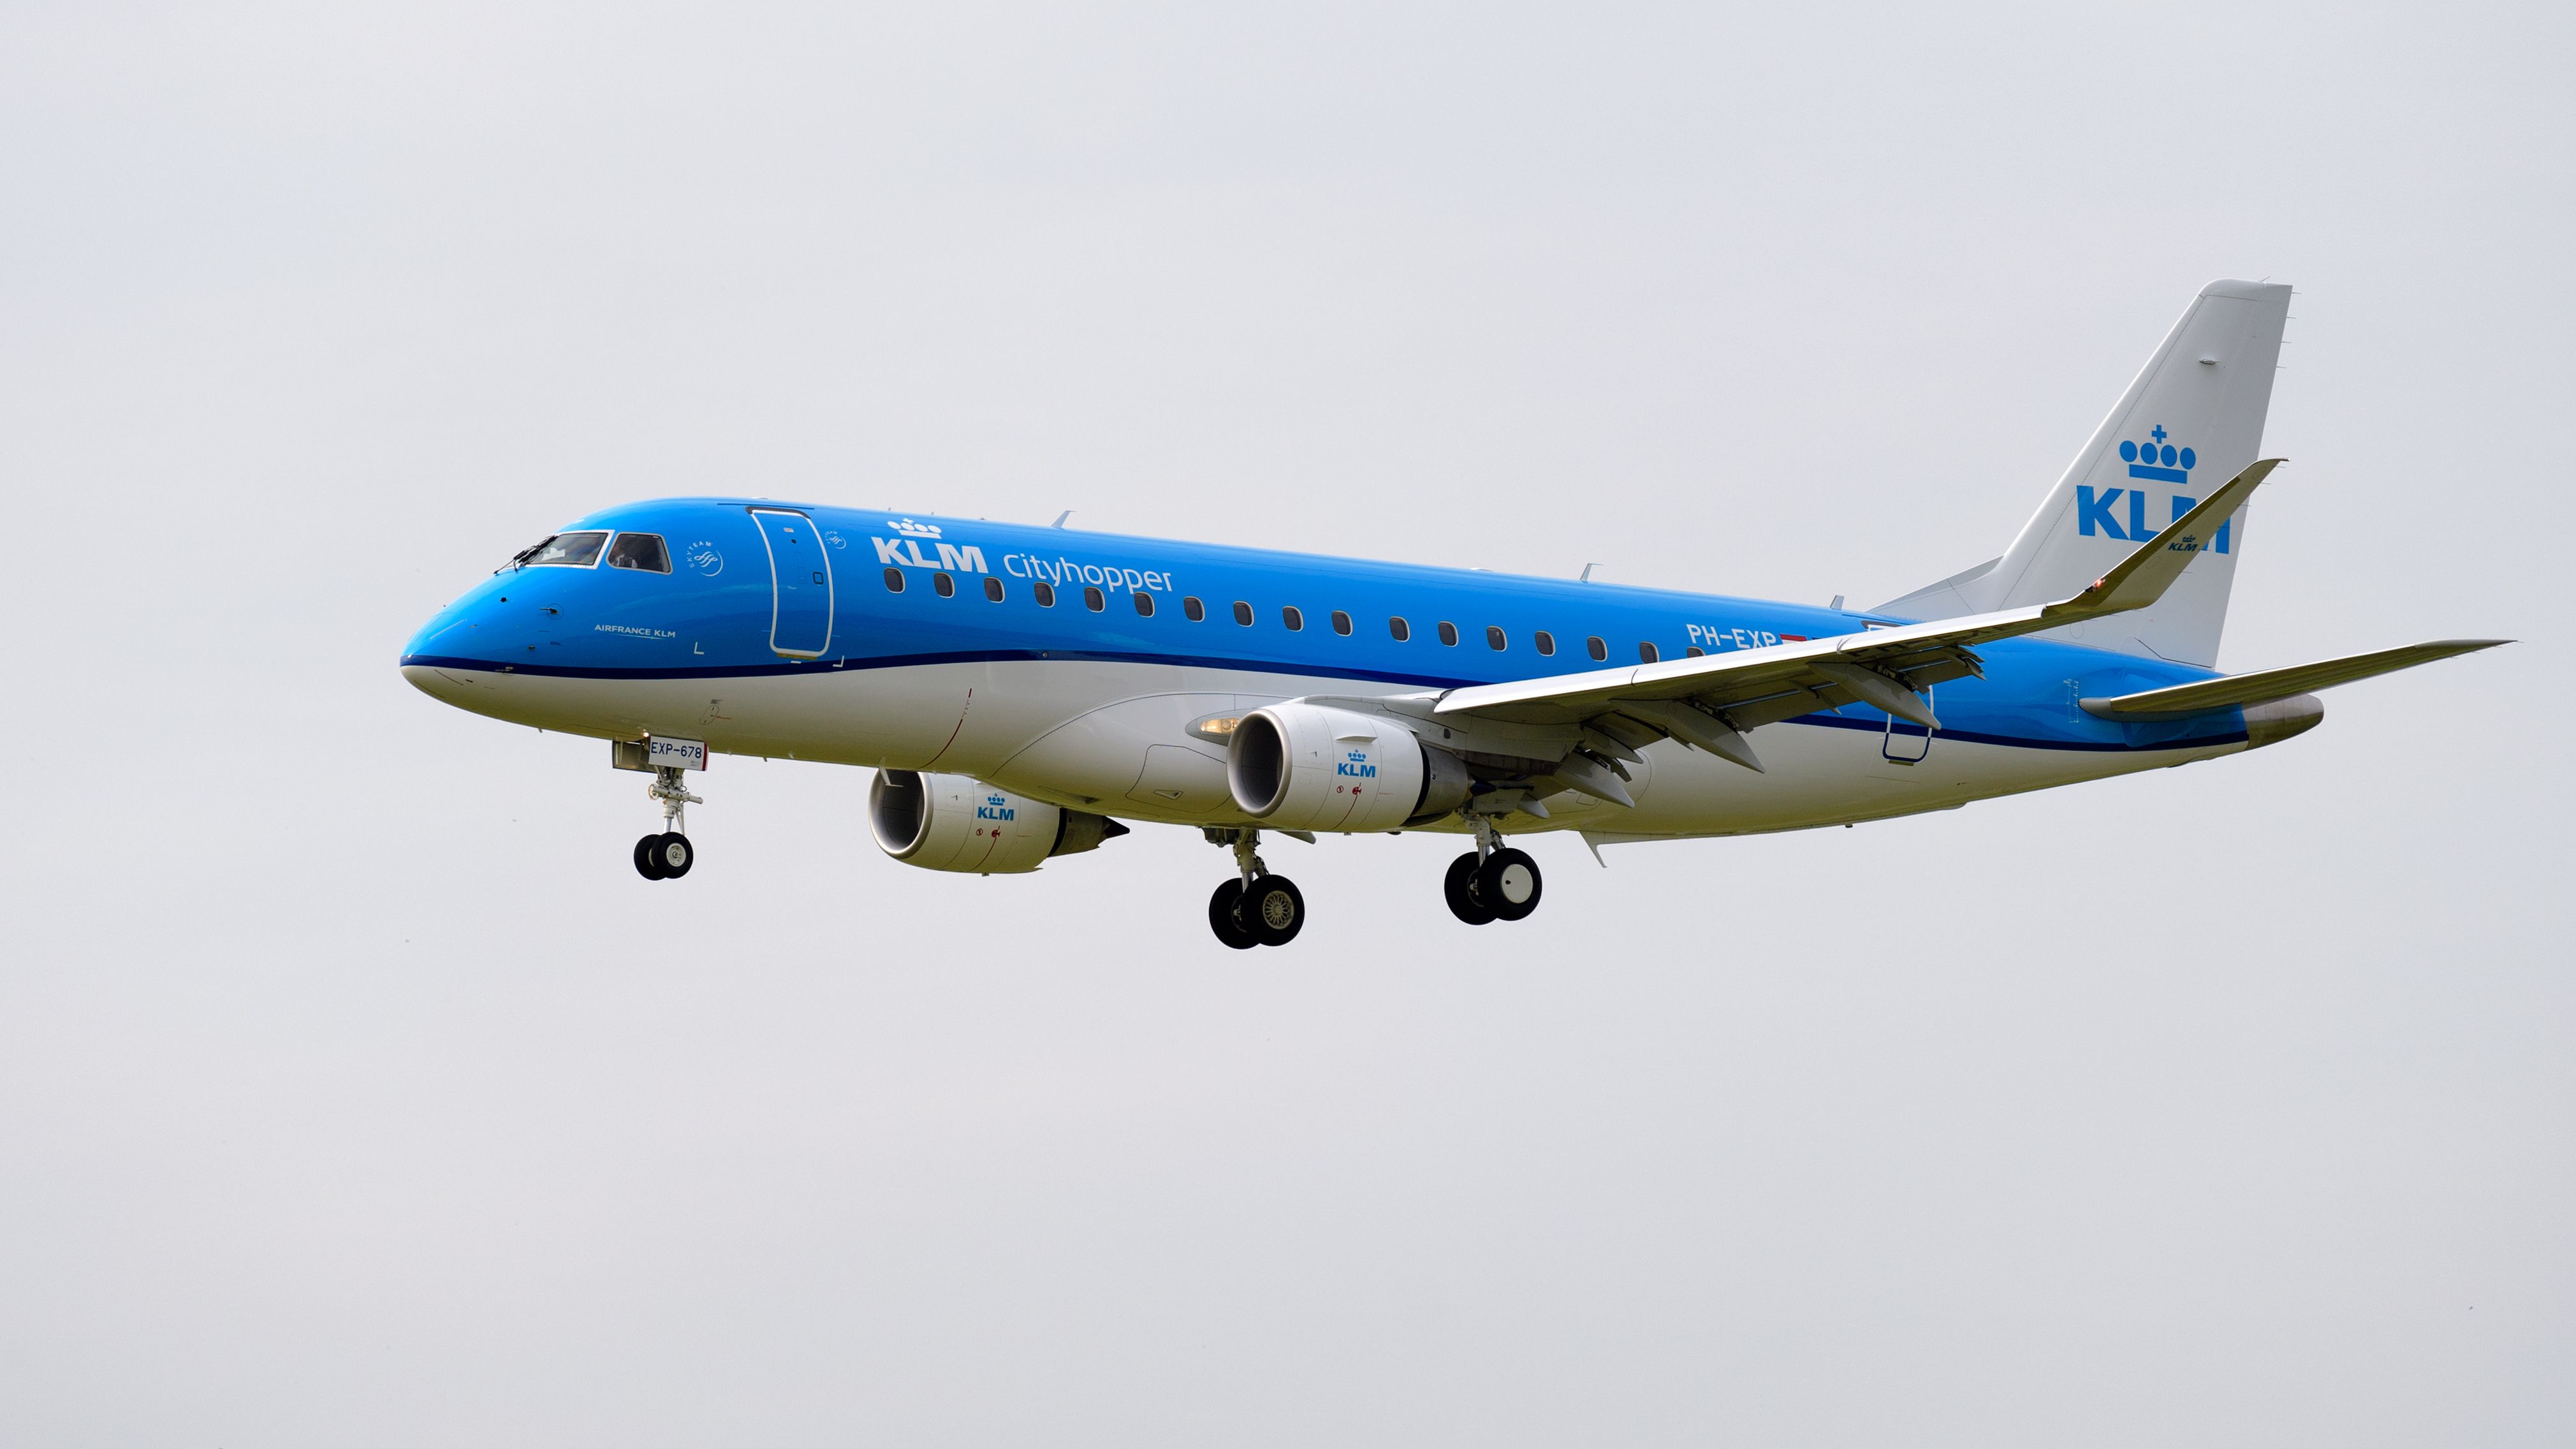 A KLM Cityhopper Embraer E175 Flying in the sky.